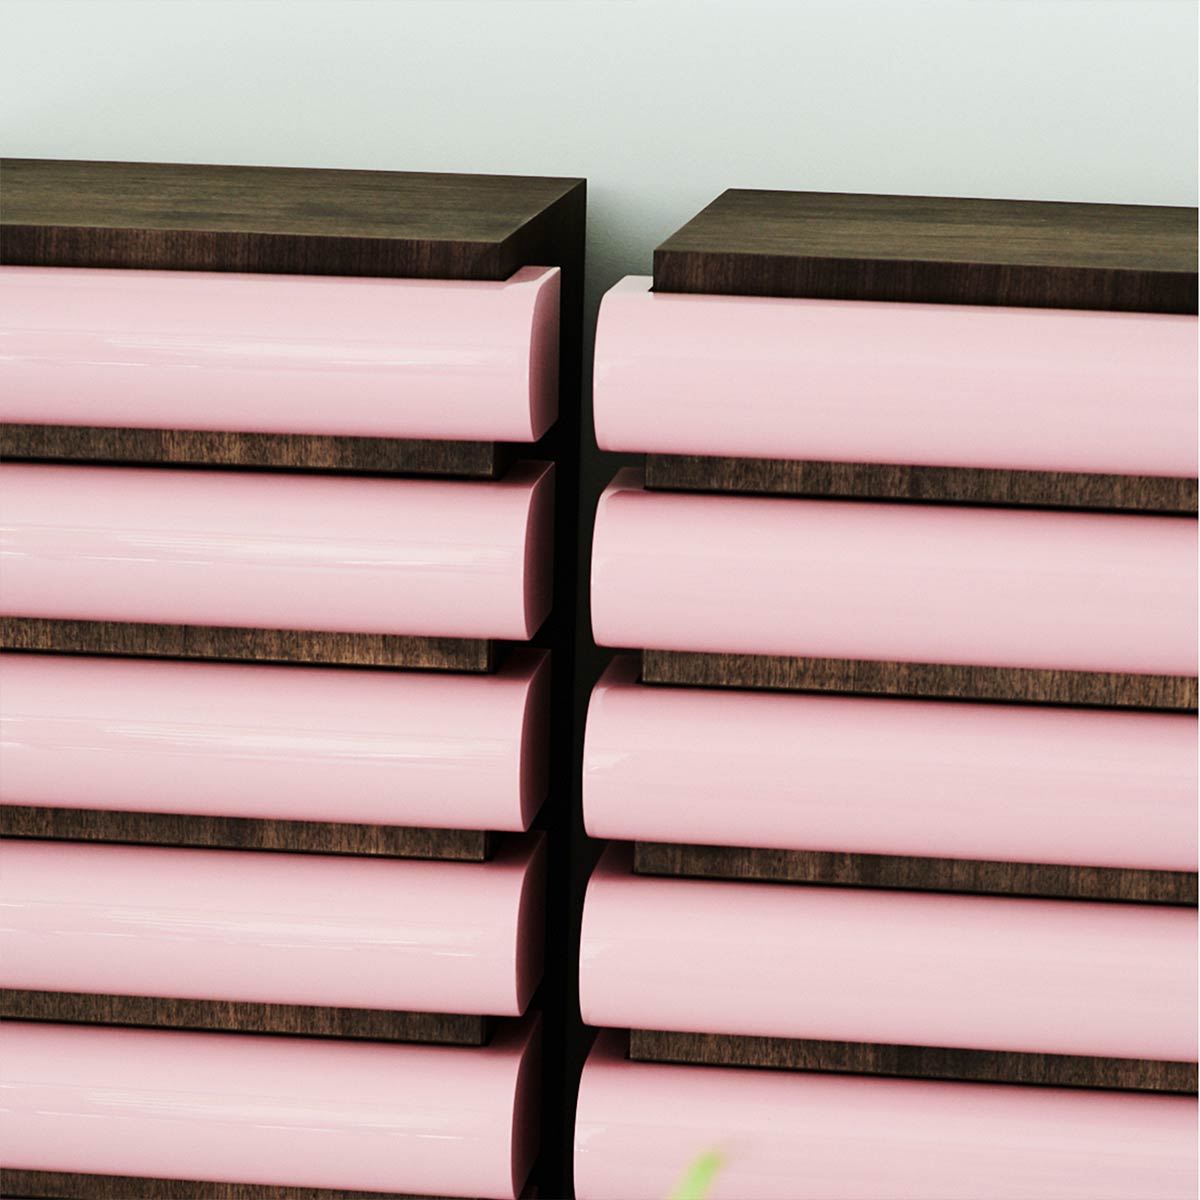 product-color-Noce/Laccato Lucido Rosa, Walnut/Glossy Pink Lacquered